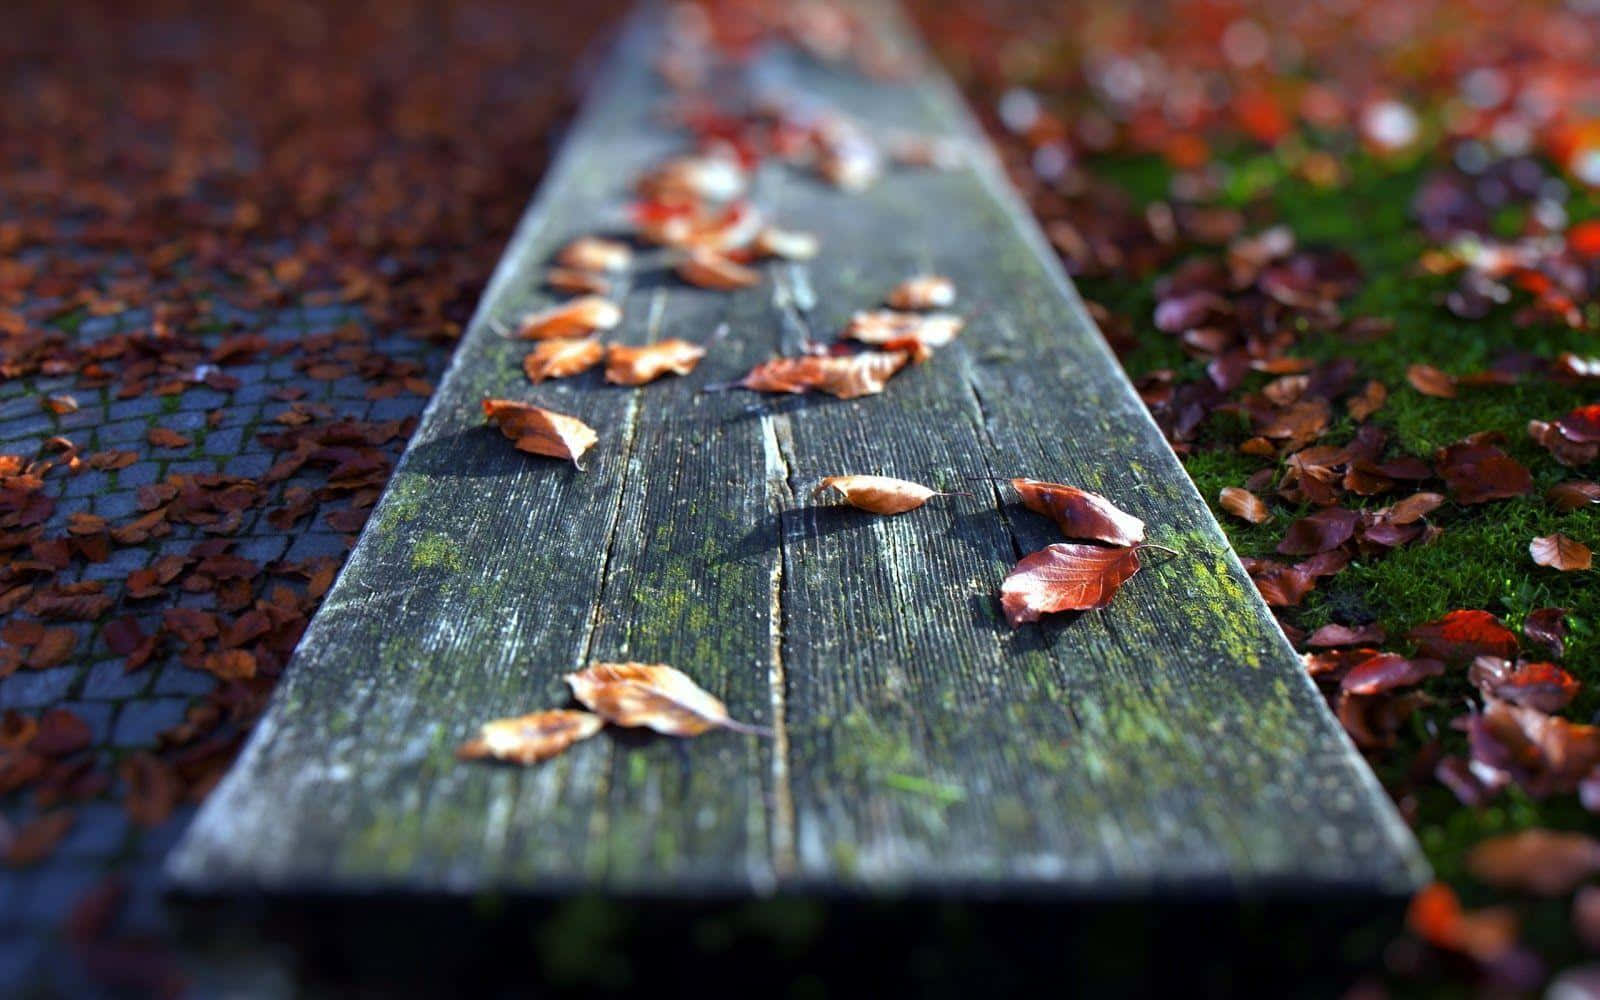 A Bench With Leaves On It